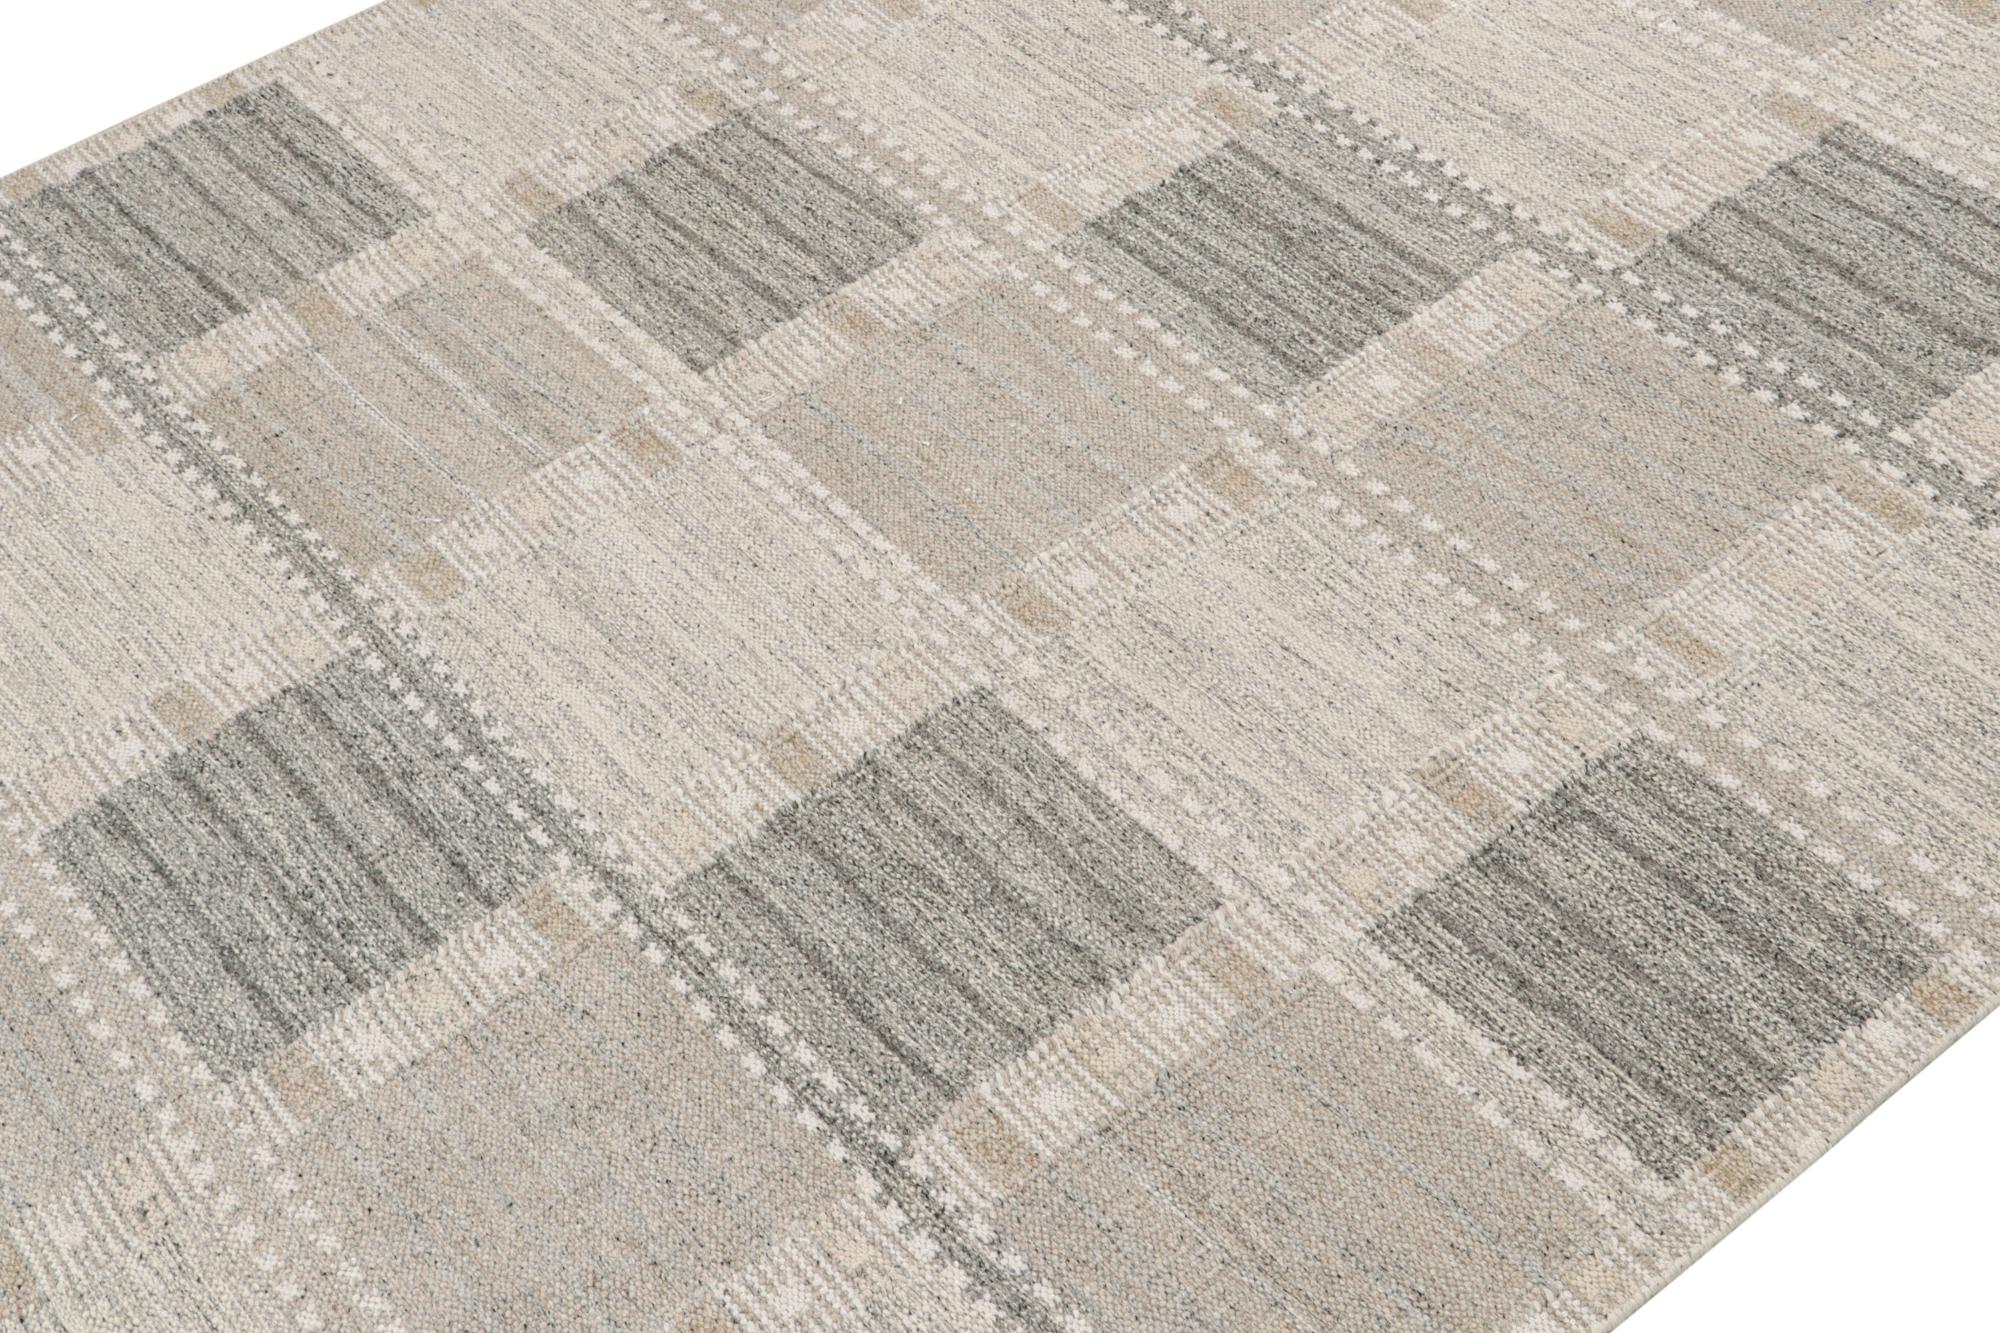 This custom Kilim design is a new addition to the Scandinavian Collection by Rug & Kilim. Handwoven in wool and natural yarns, its design reflects a contemporary take on mid-century Rollakans and Swedish Deco style.

On the Design: 

These